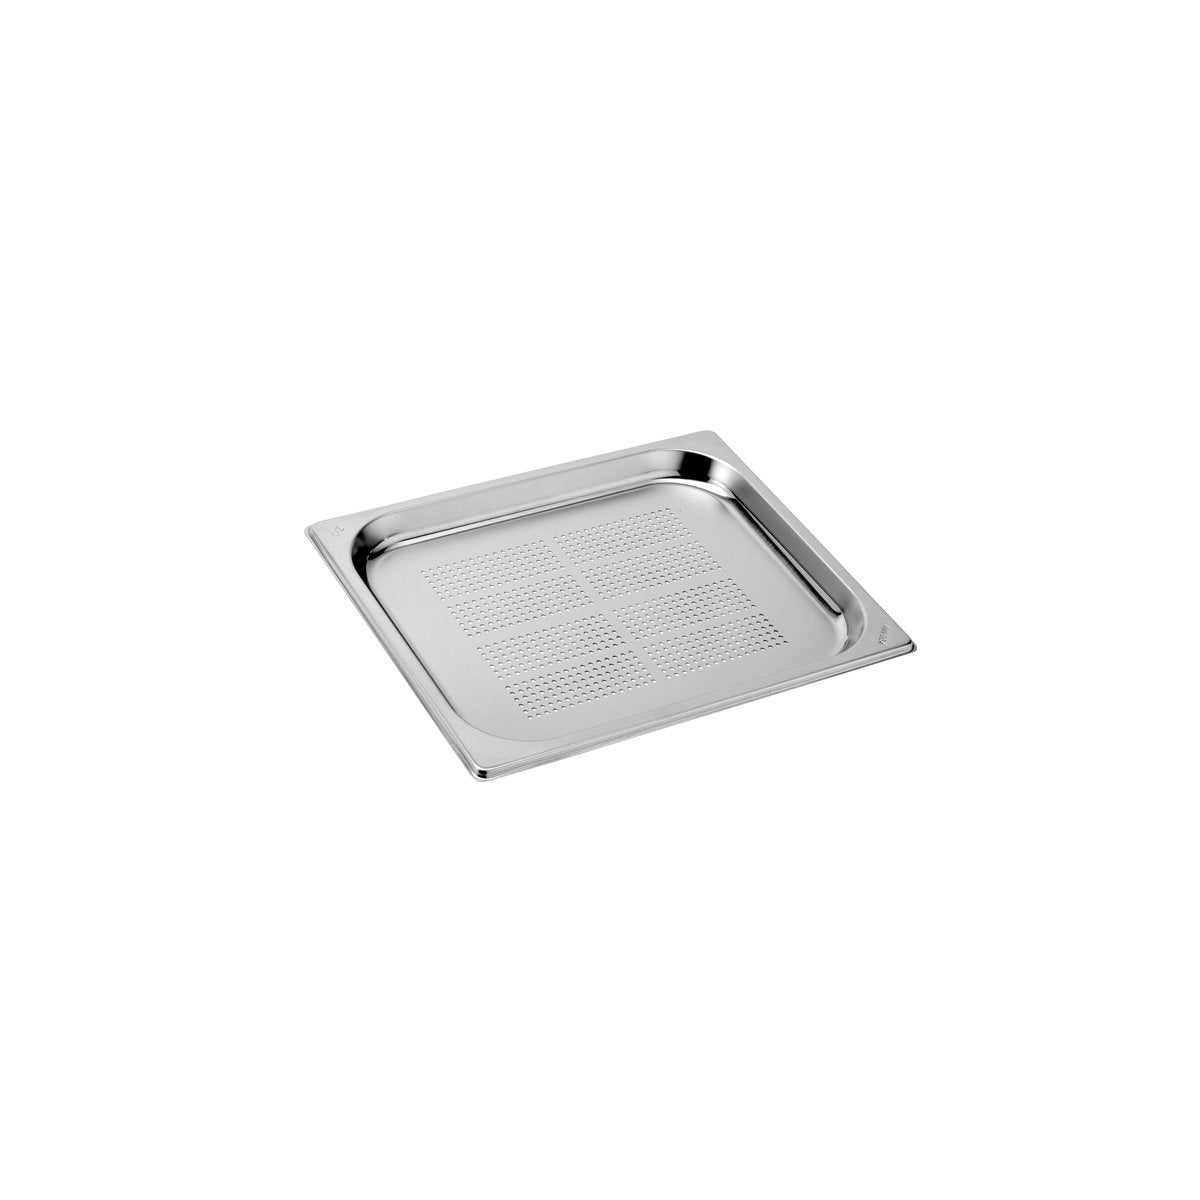 MP-12020 Inox Macel Maxipan Gastronorm Perforated Base Only 1/2 Size 20mm Tomkin Australia Hospitality Supplies